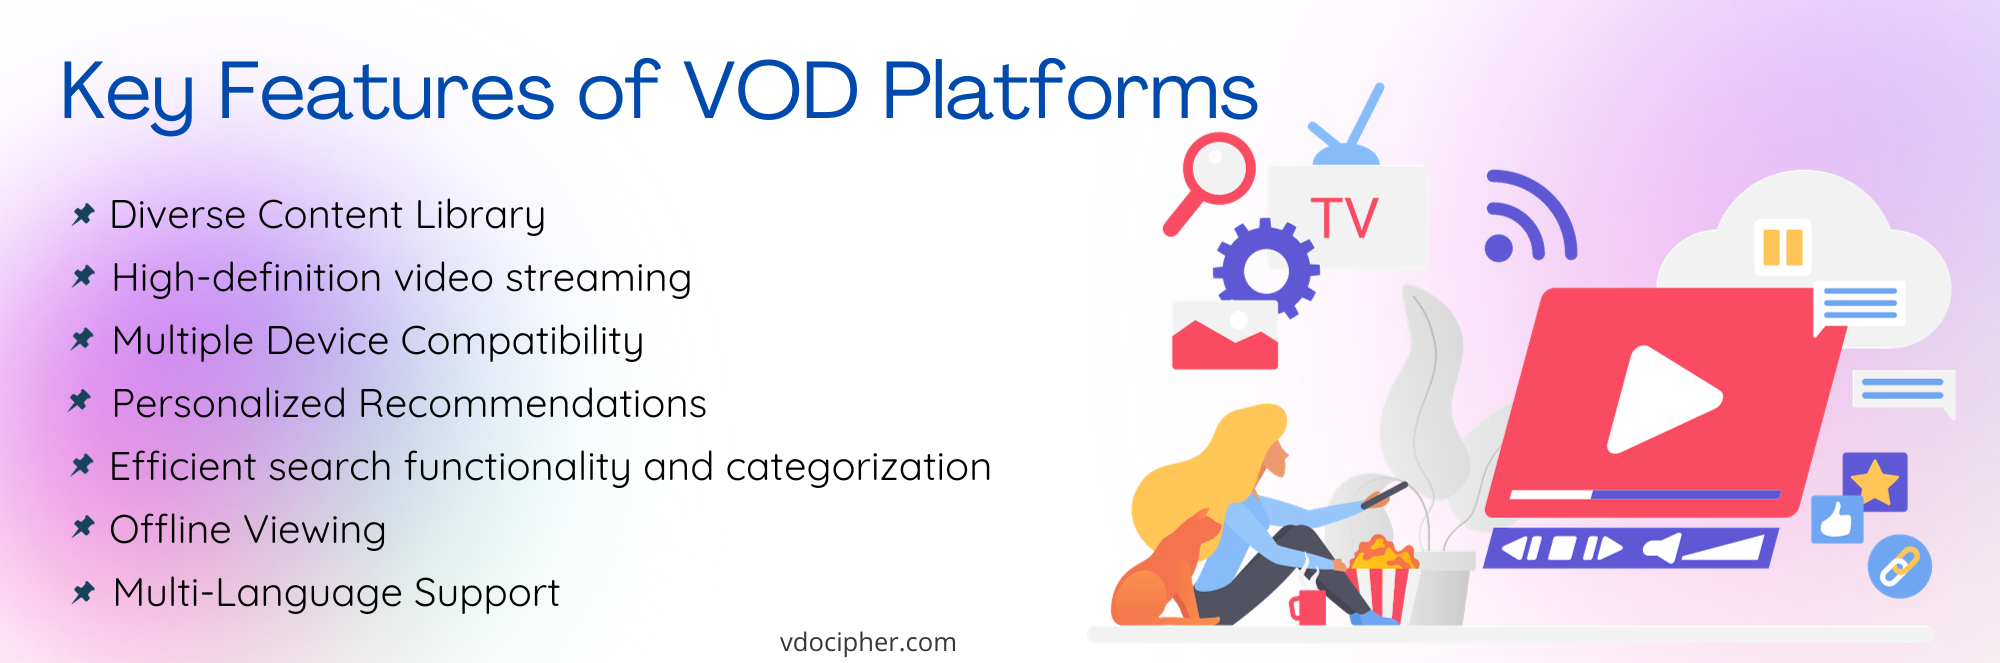 Key features of VOD platforms infographic image